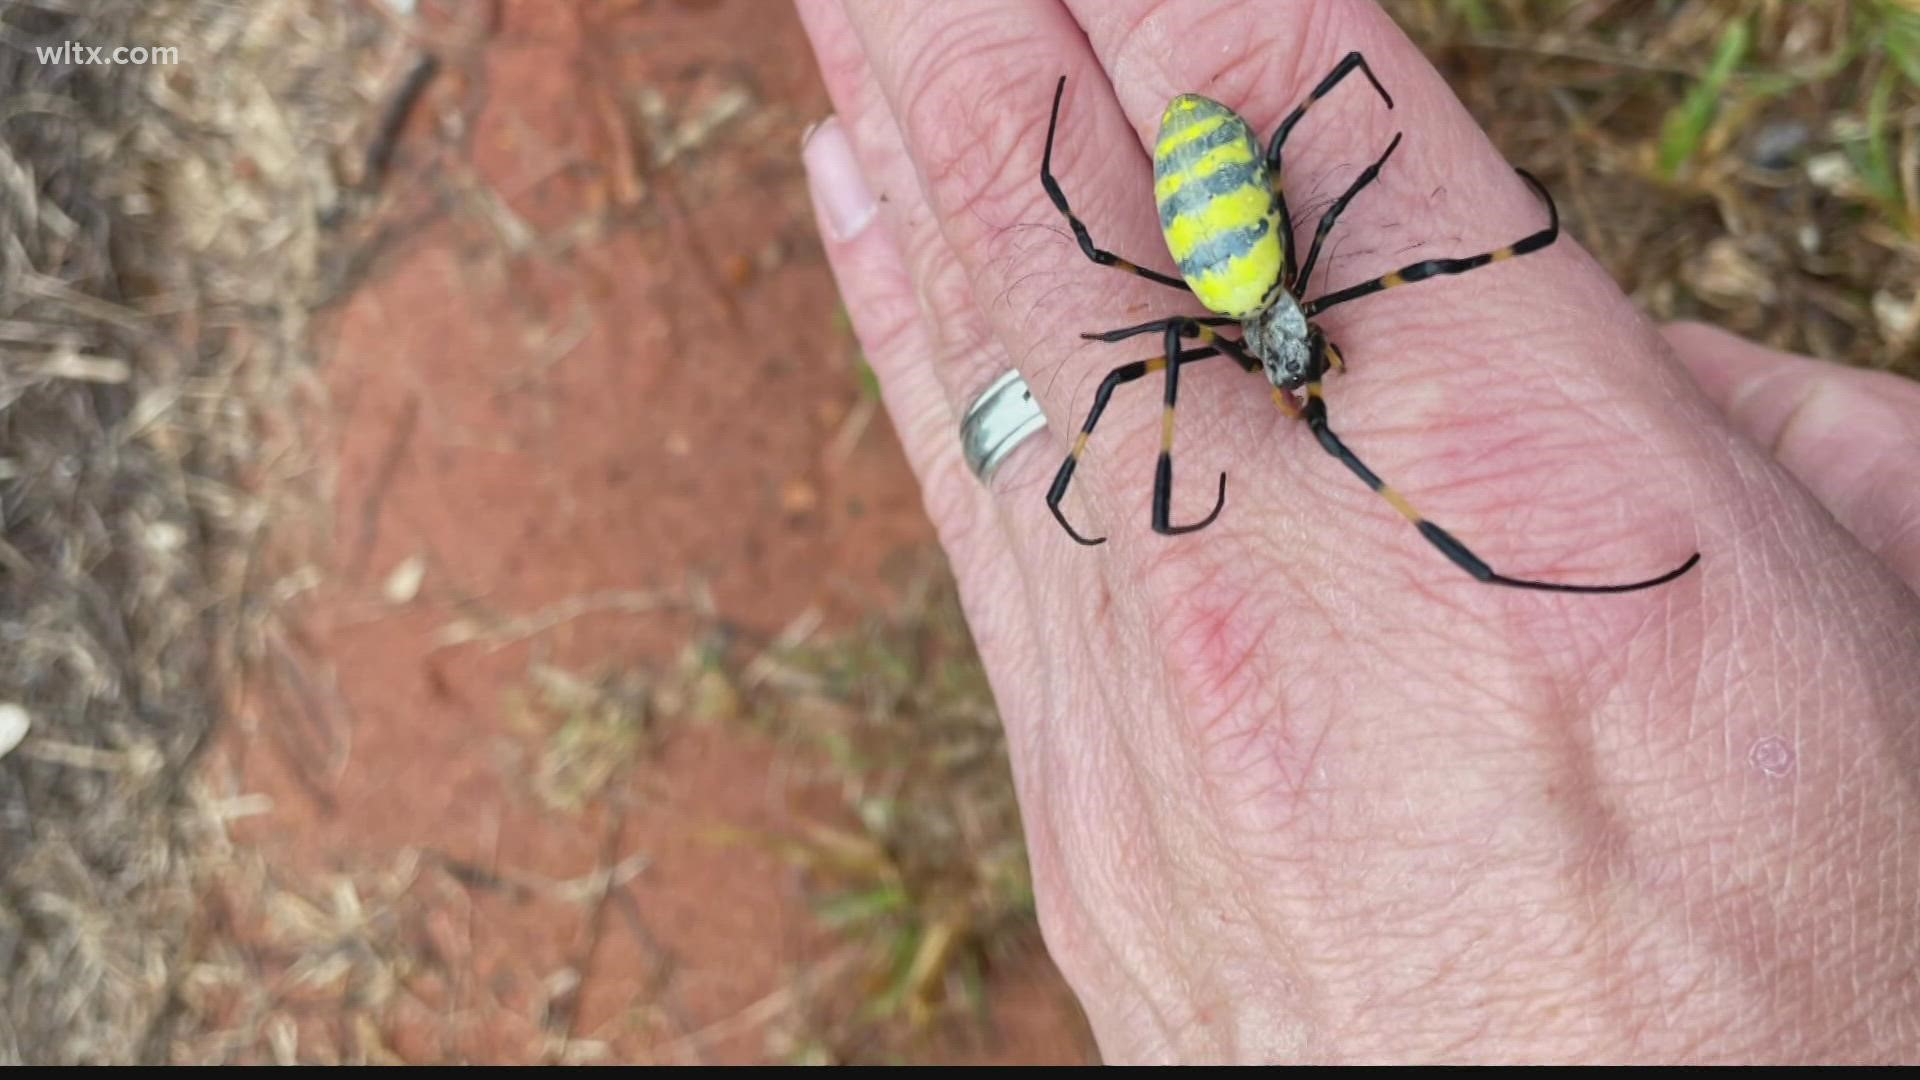 Joro spiders are on the move, and in some places, it looks like an invasion.